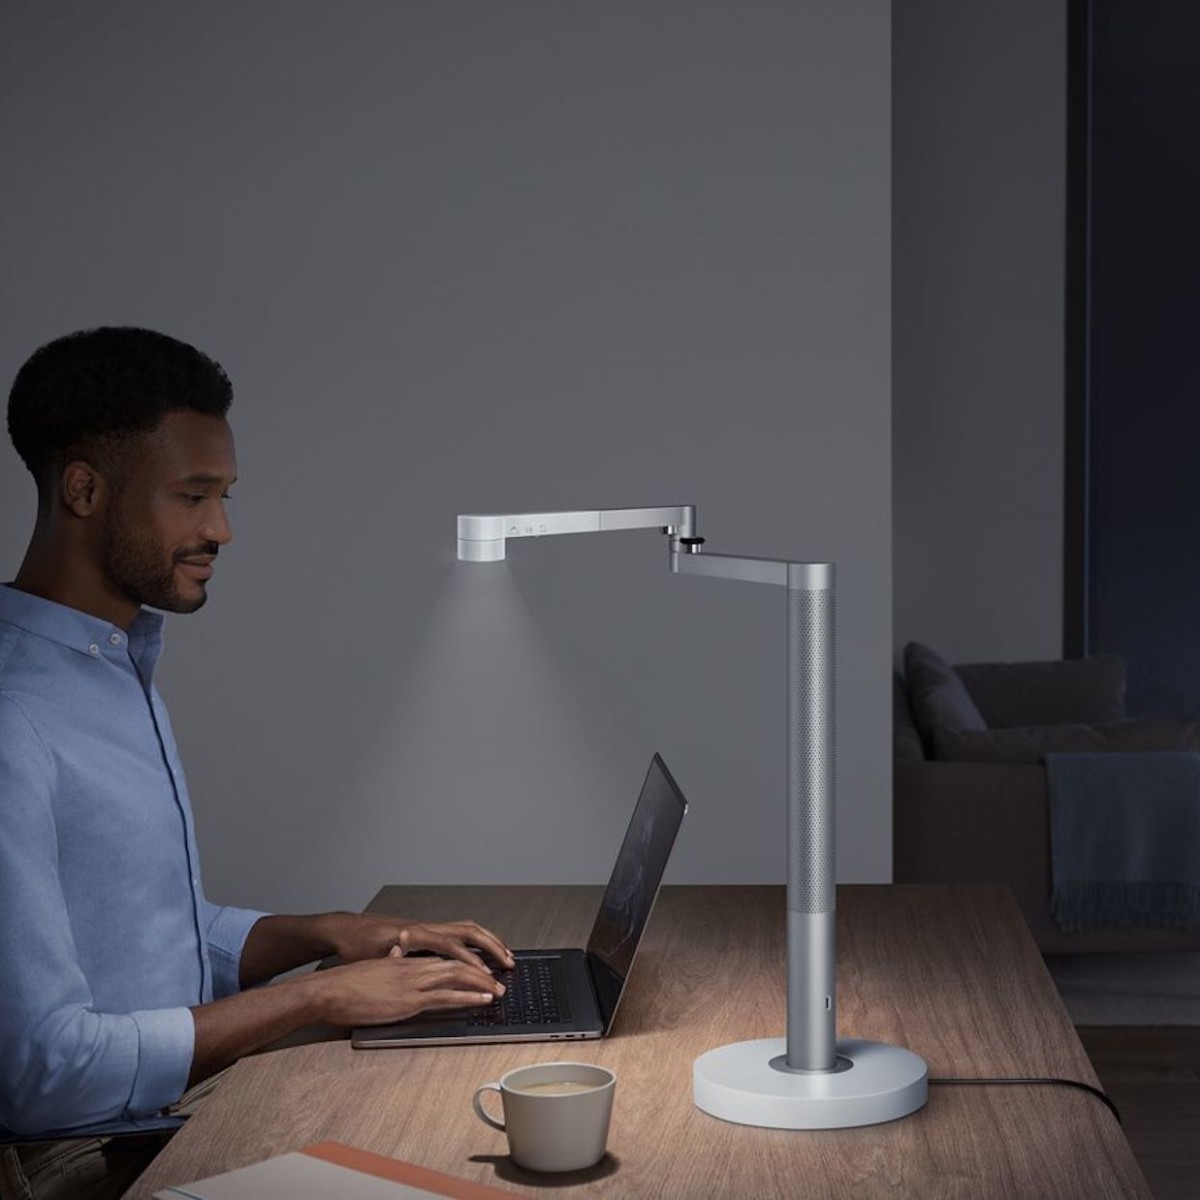 Dyson Lightcycle Morph Adaptable Intelligent Lighting responds to surroundings and time of day